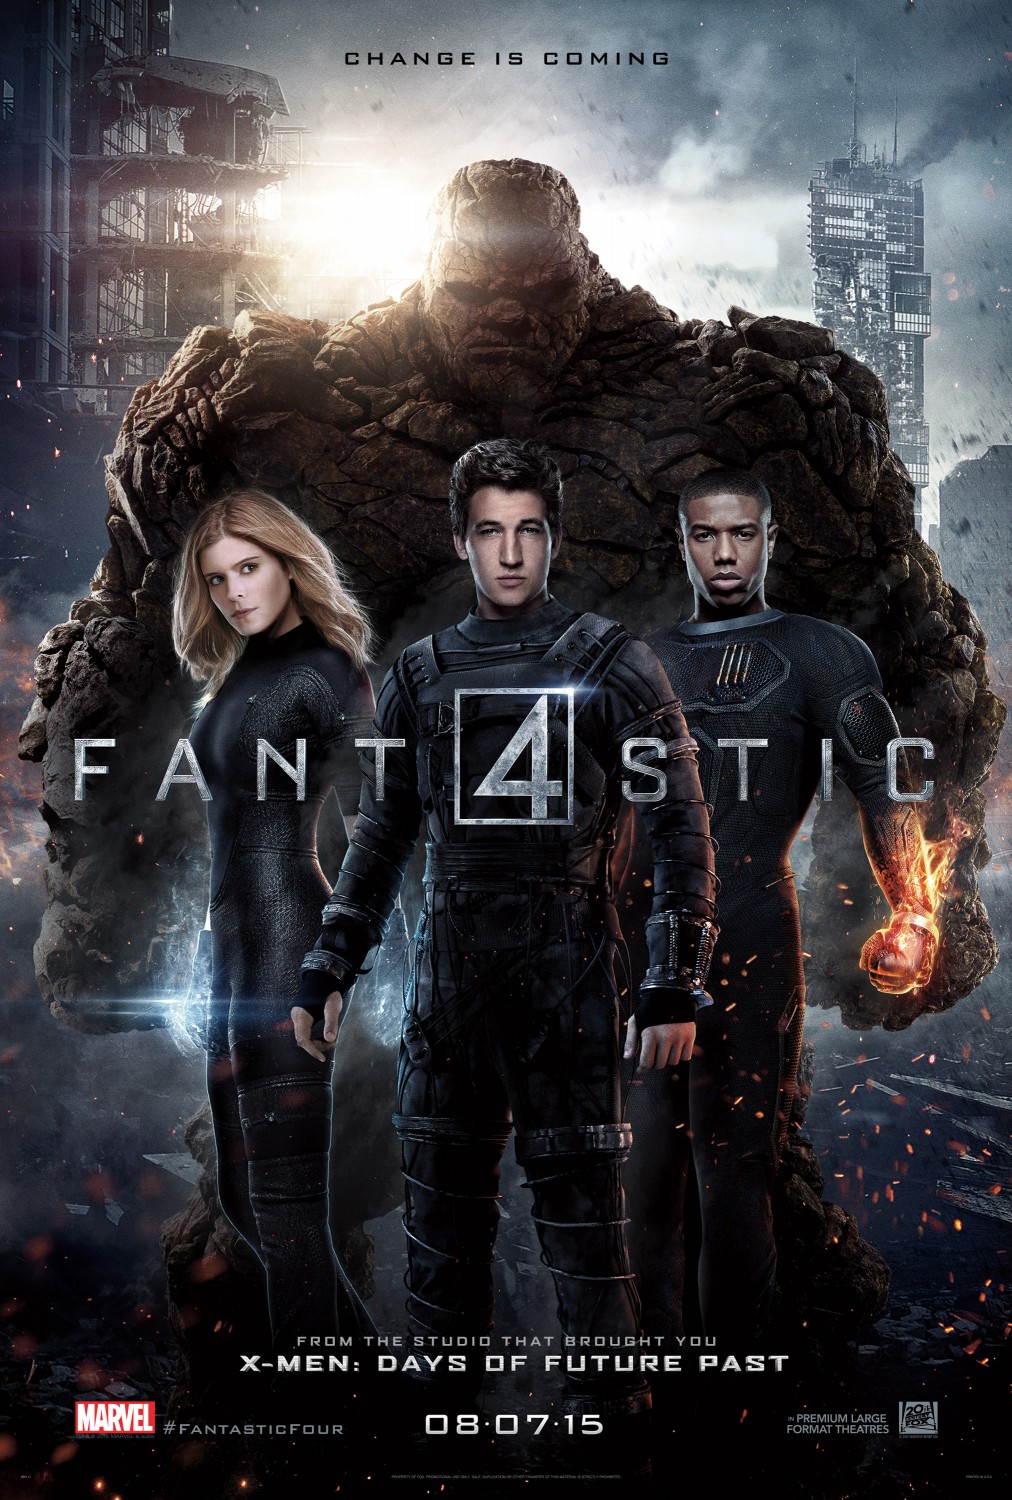 Fantastic Four film review: worth braving the storm?